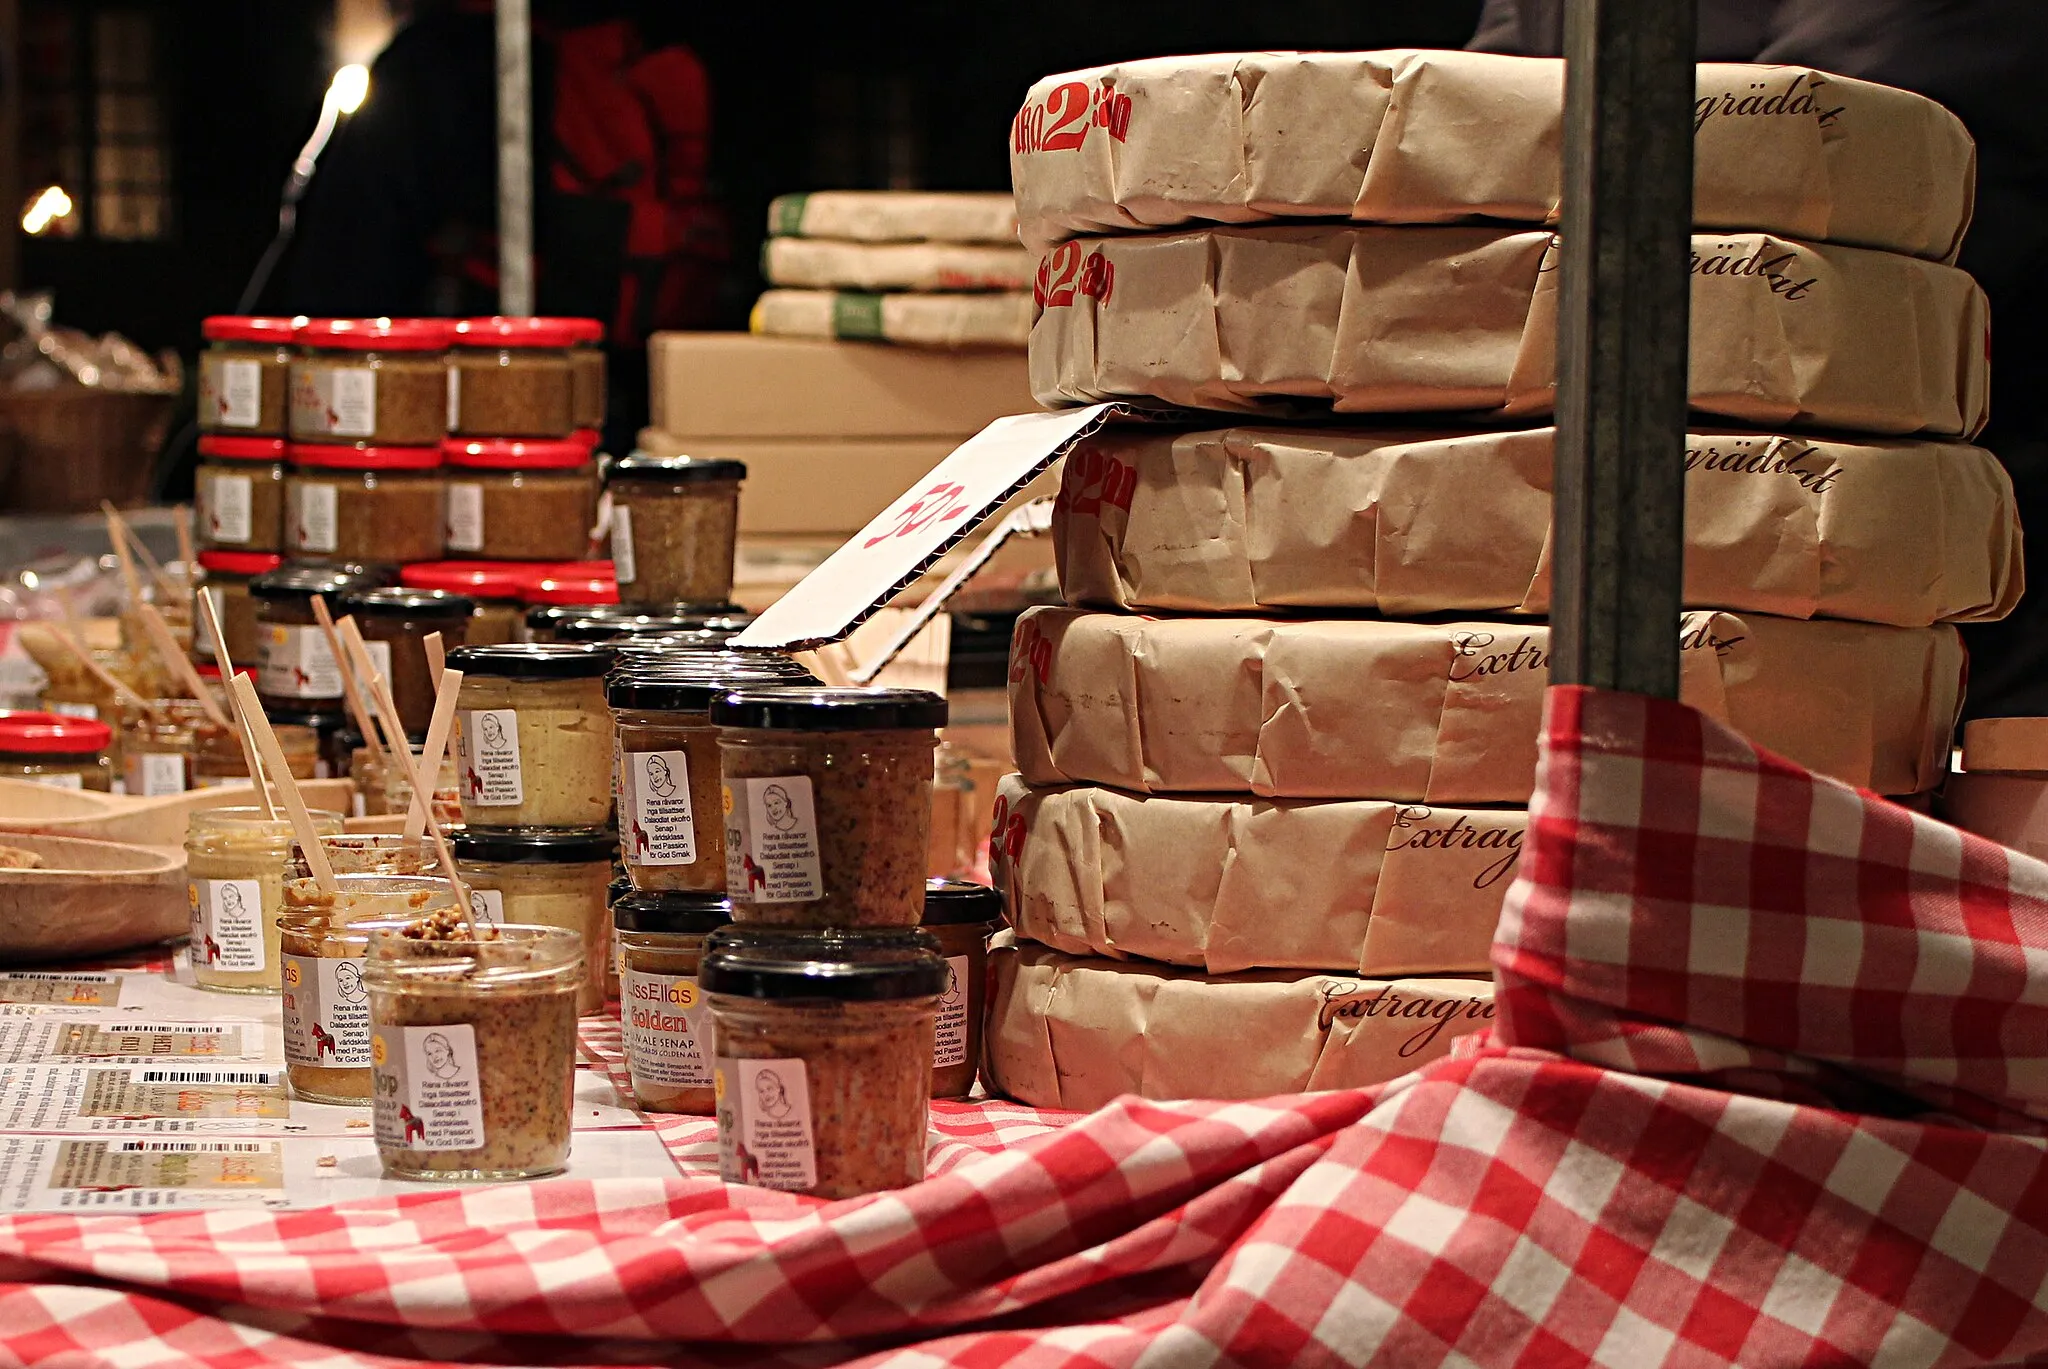 Photo showing: Price-winning mustard (seval gold, silver and bronze medals in World Wide Mustard Competition) from Liss-Ellas (Garpenberg, Hedemora Municipality) and Swedish crispbread Vikabröd from Vika bröd (Stora Skedvi, Säter Municipality). Säter "Christmas market" the first Advent sunday.